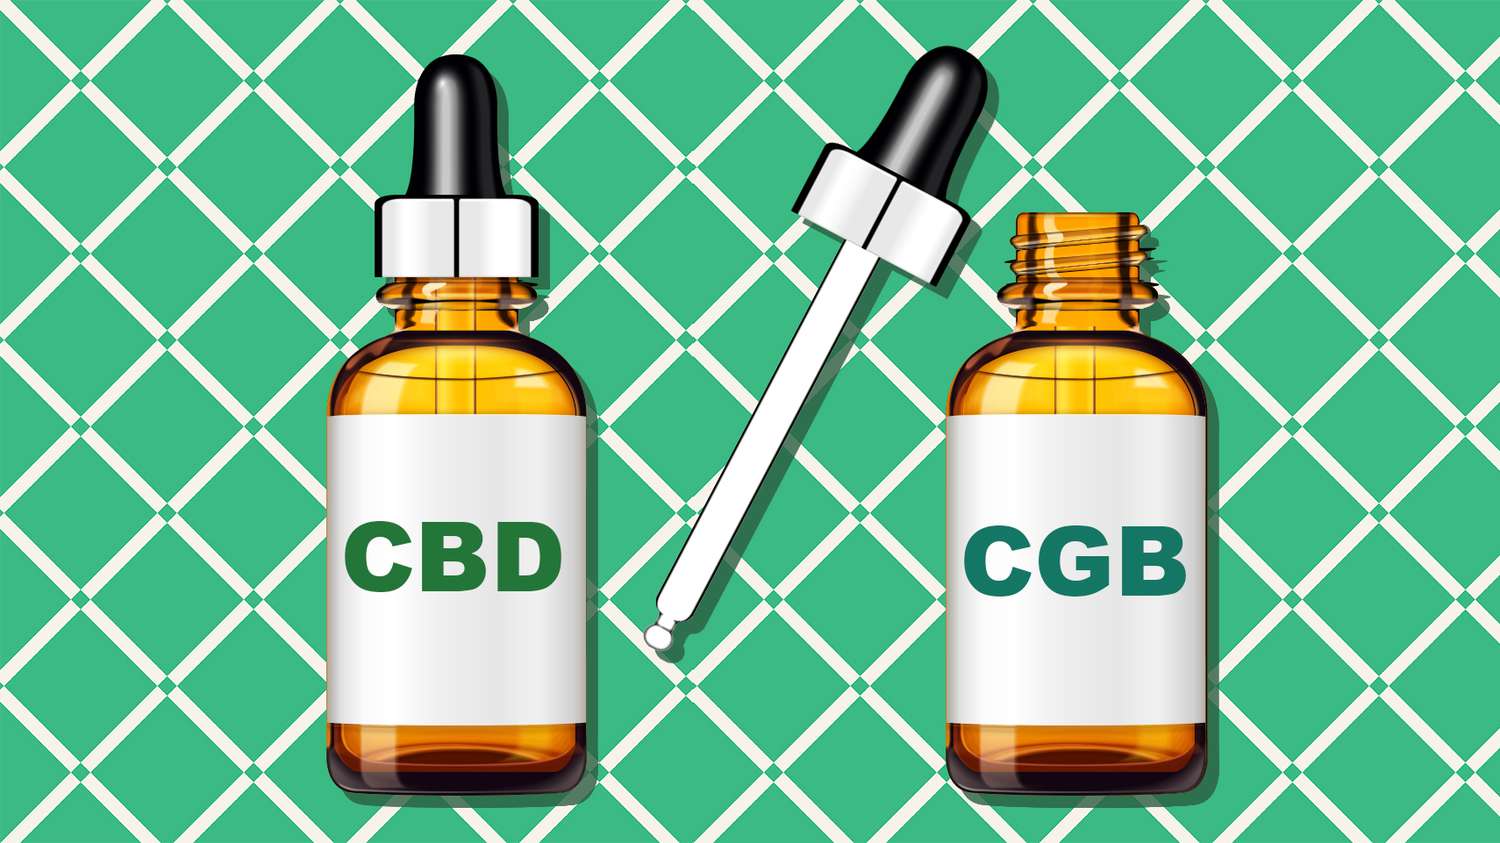 Is CBG the Next CBD? Here's What You Should Know